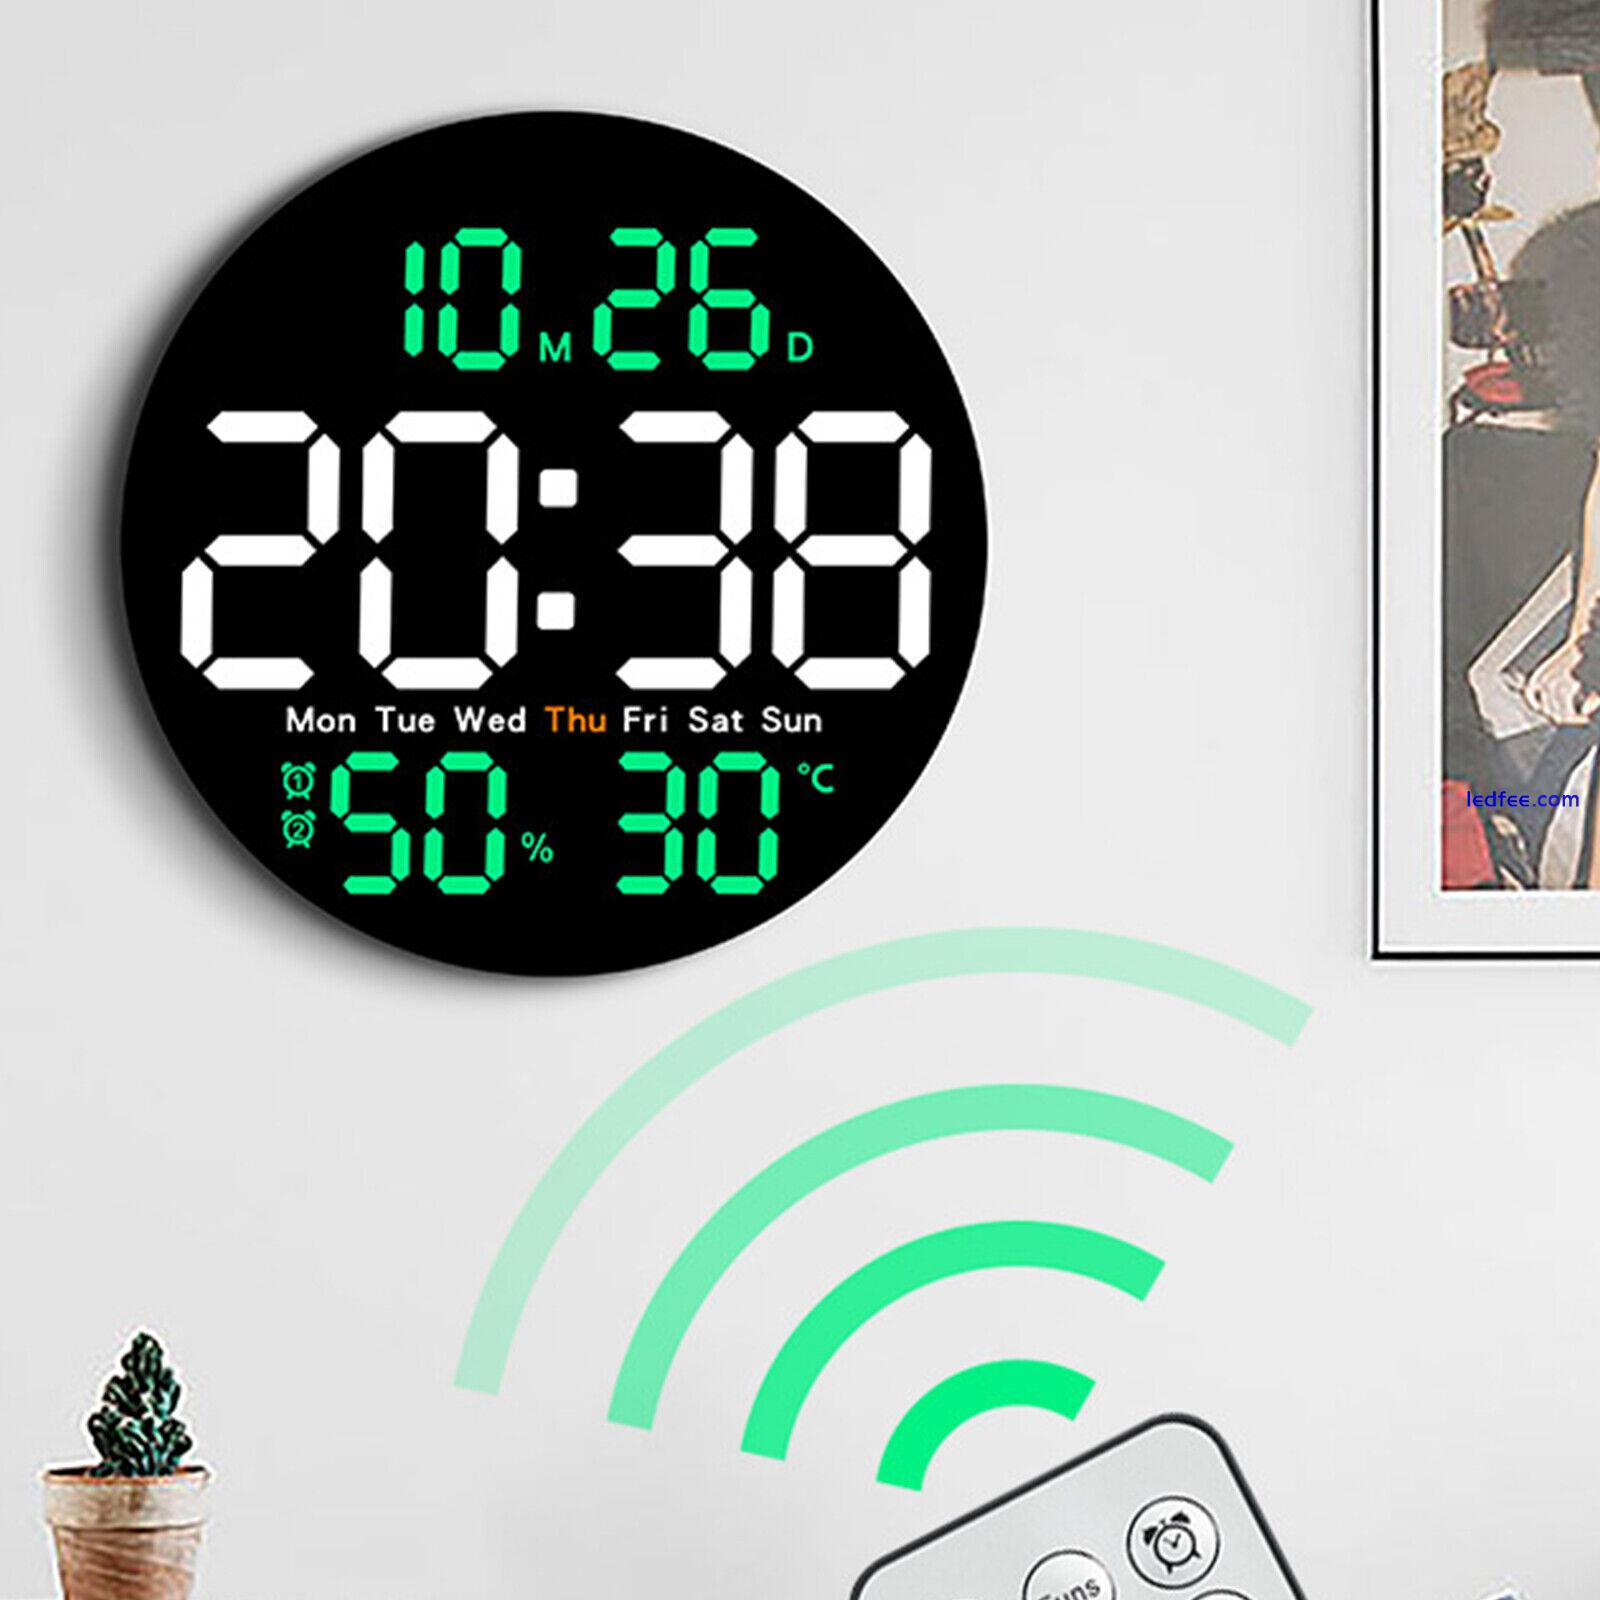 10inch LED Digital Alarm Clock With Temperature Date Large Display Wall Clock 2 